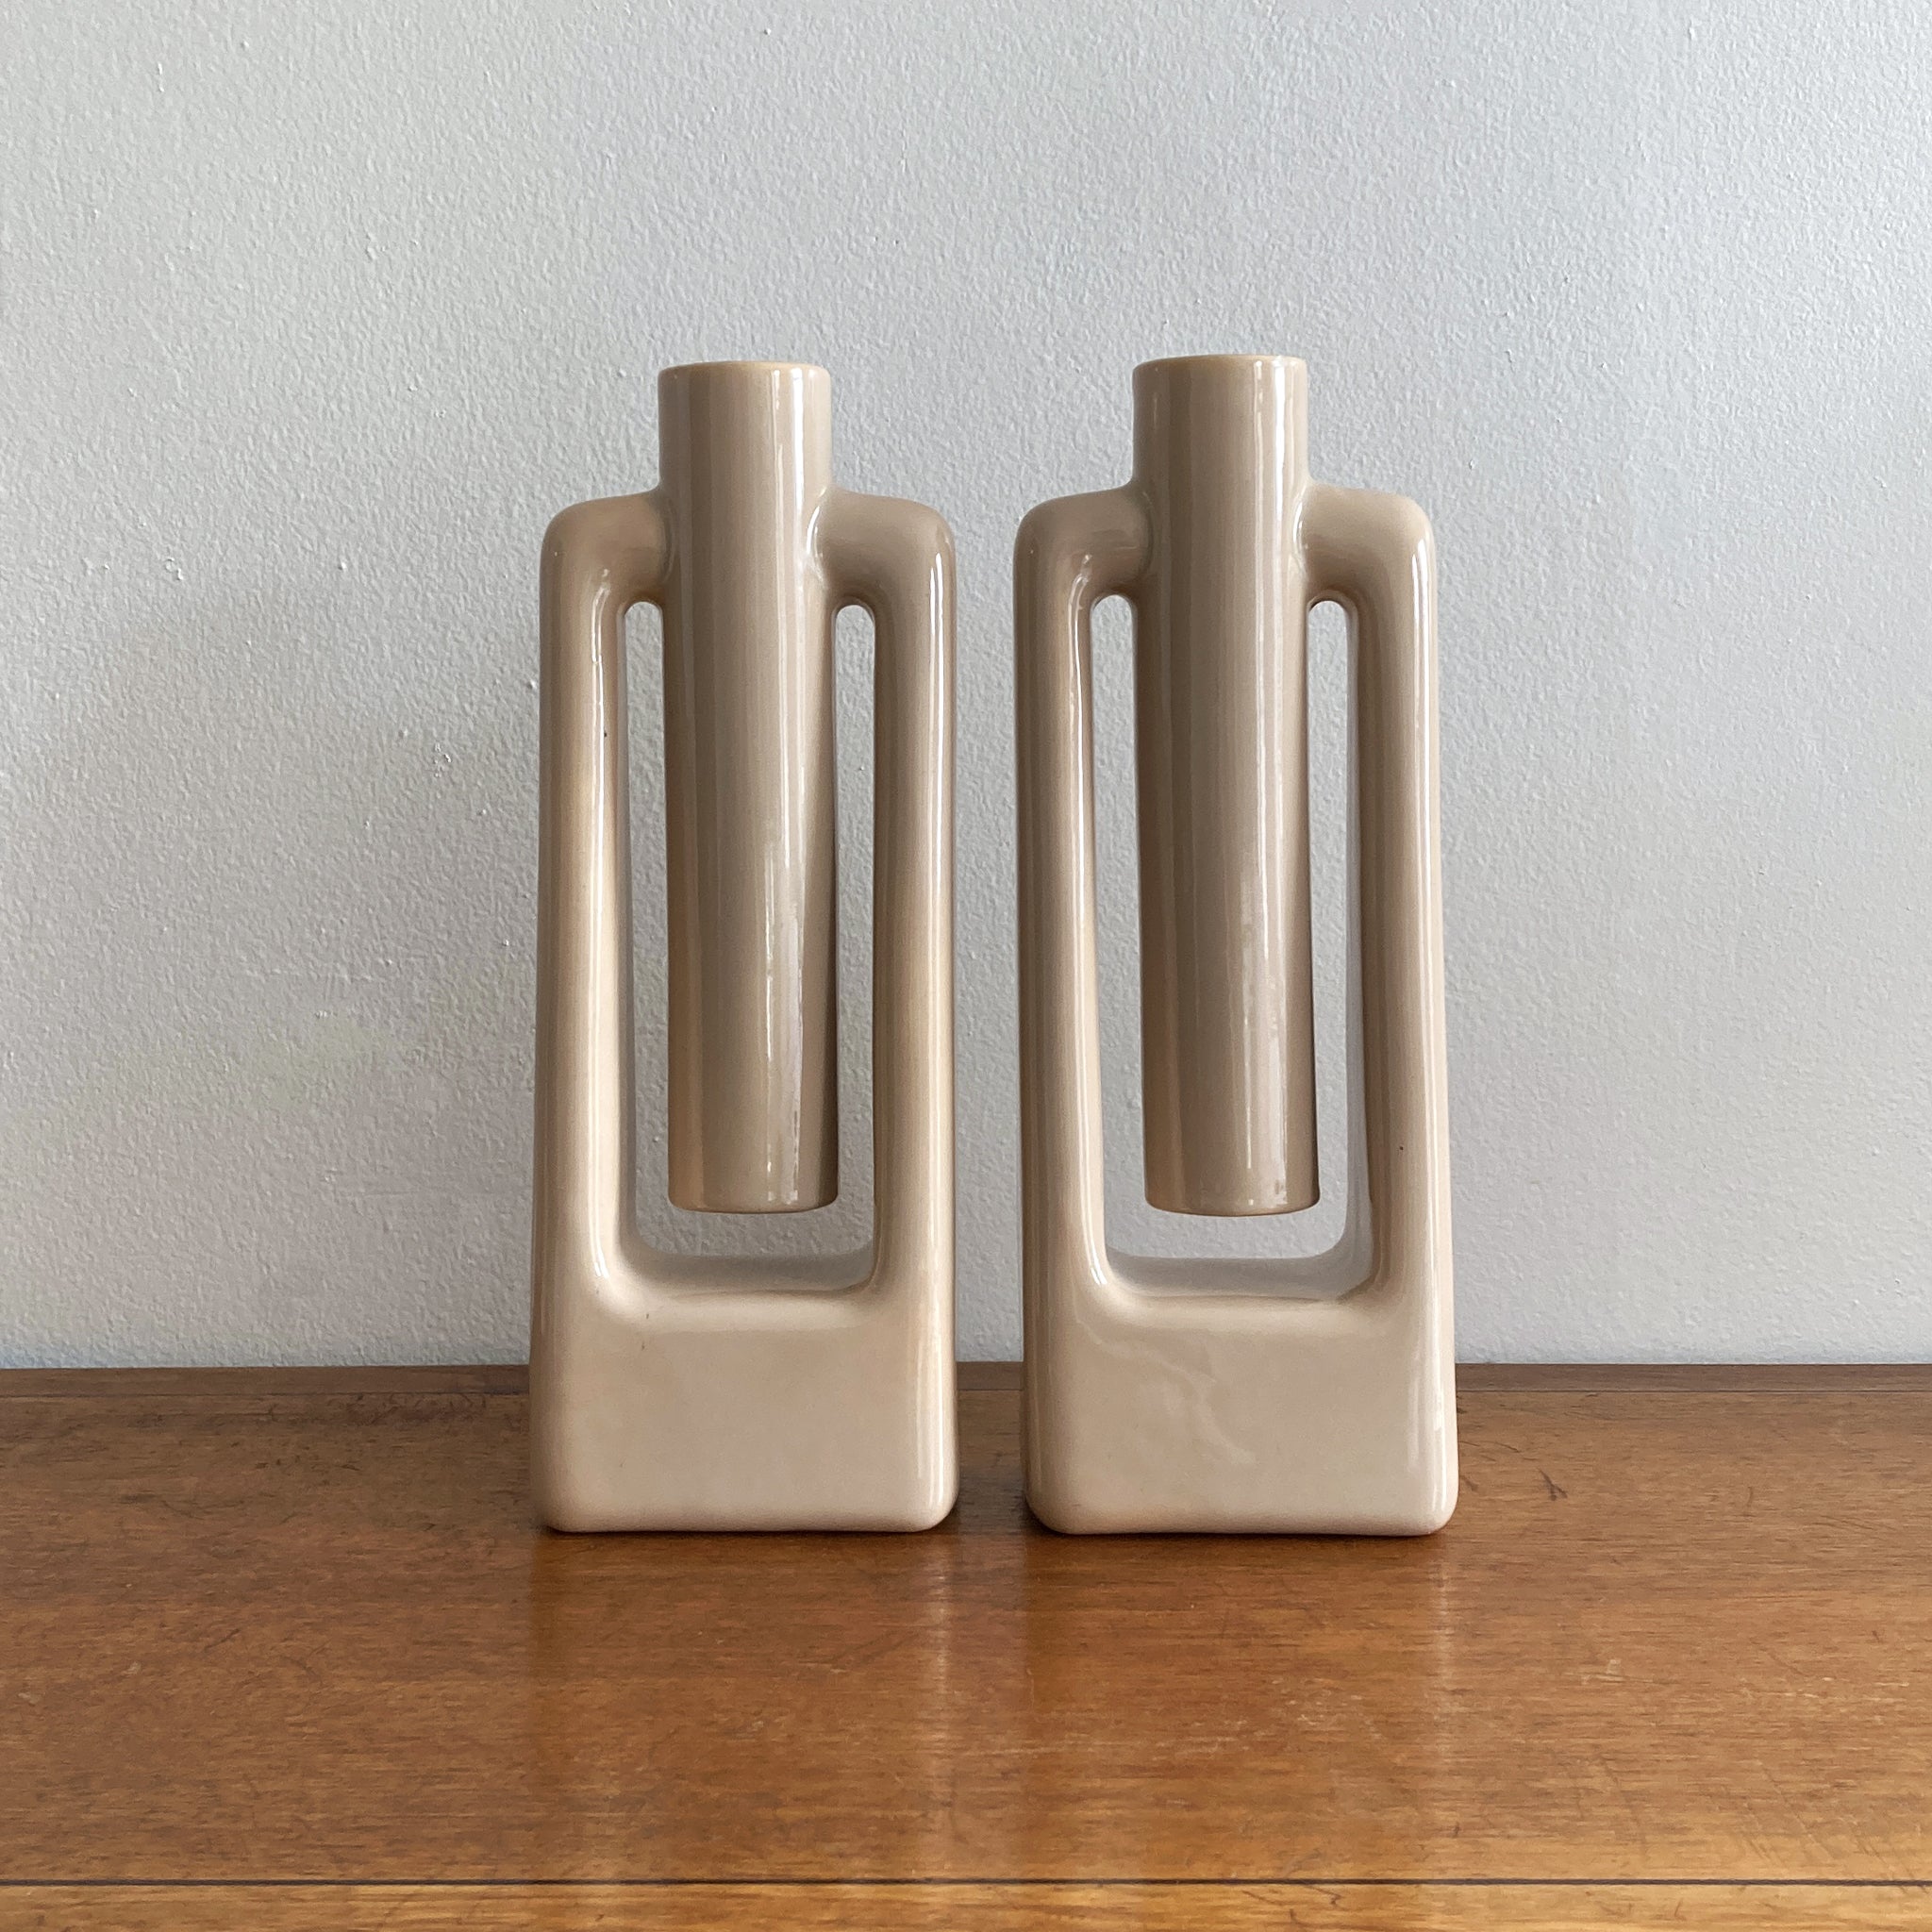 A stunning and rare pair of abstract midcentury style Haeger beige/ ecru vases, medium size. In great condition, no crazing or cracks. This pair coordinates with three other matching vases, listed separately, see photos. Beautiful as a pair, or